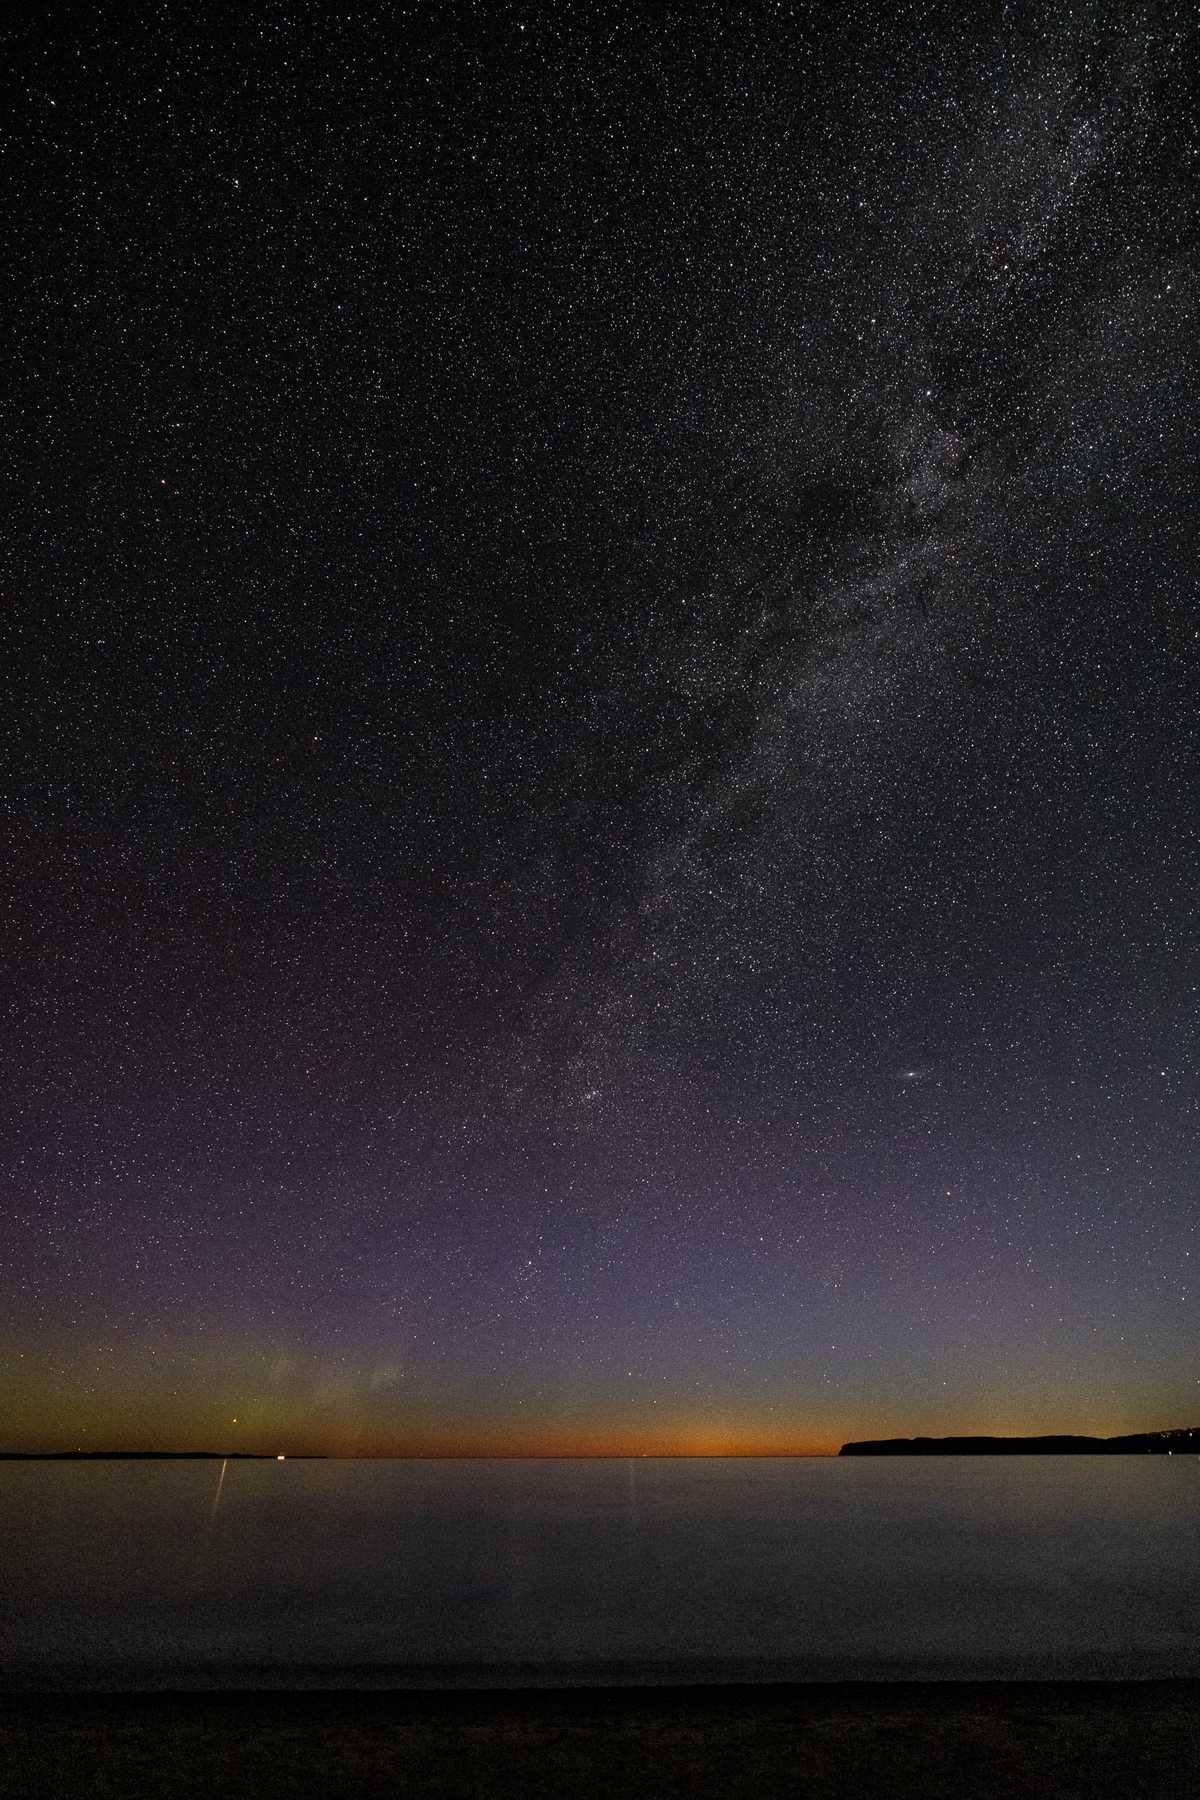 The Milky Way above some glow on the horizon